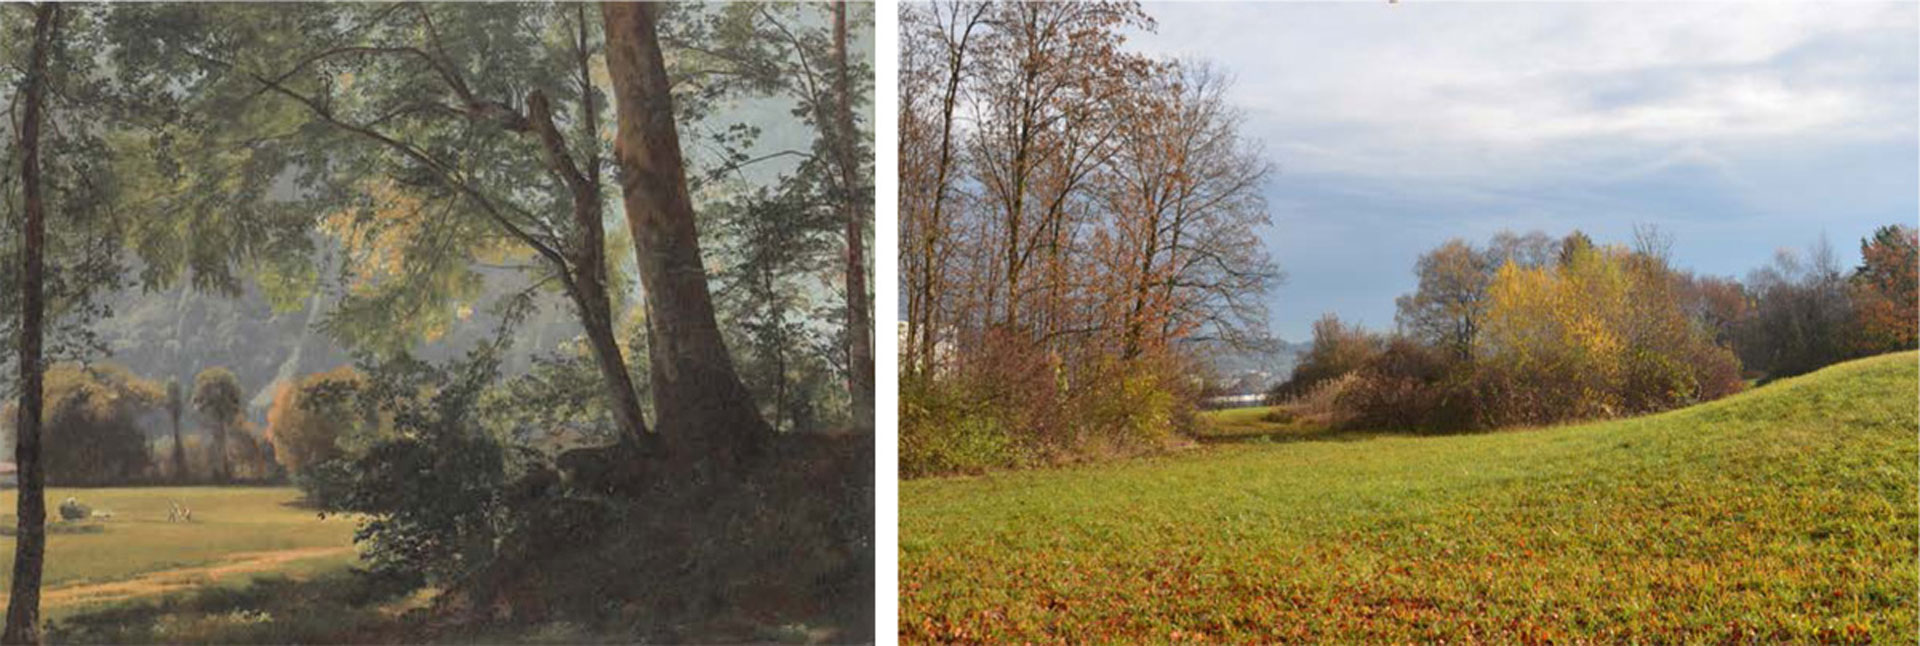 The Forest + The Clearing Johann Gottfried Steffan, "View From a Forest" 1859-05 (left) / Butzenbüel existing (right)